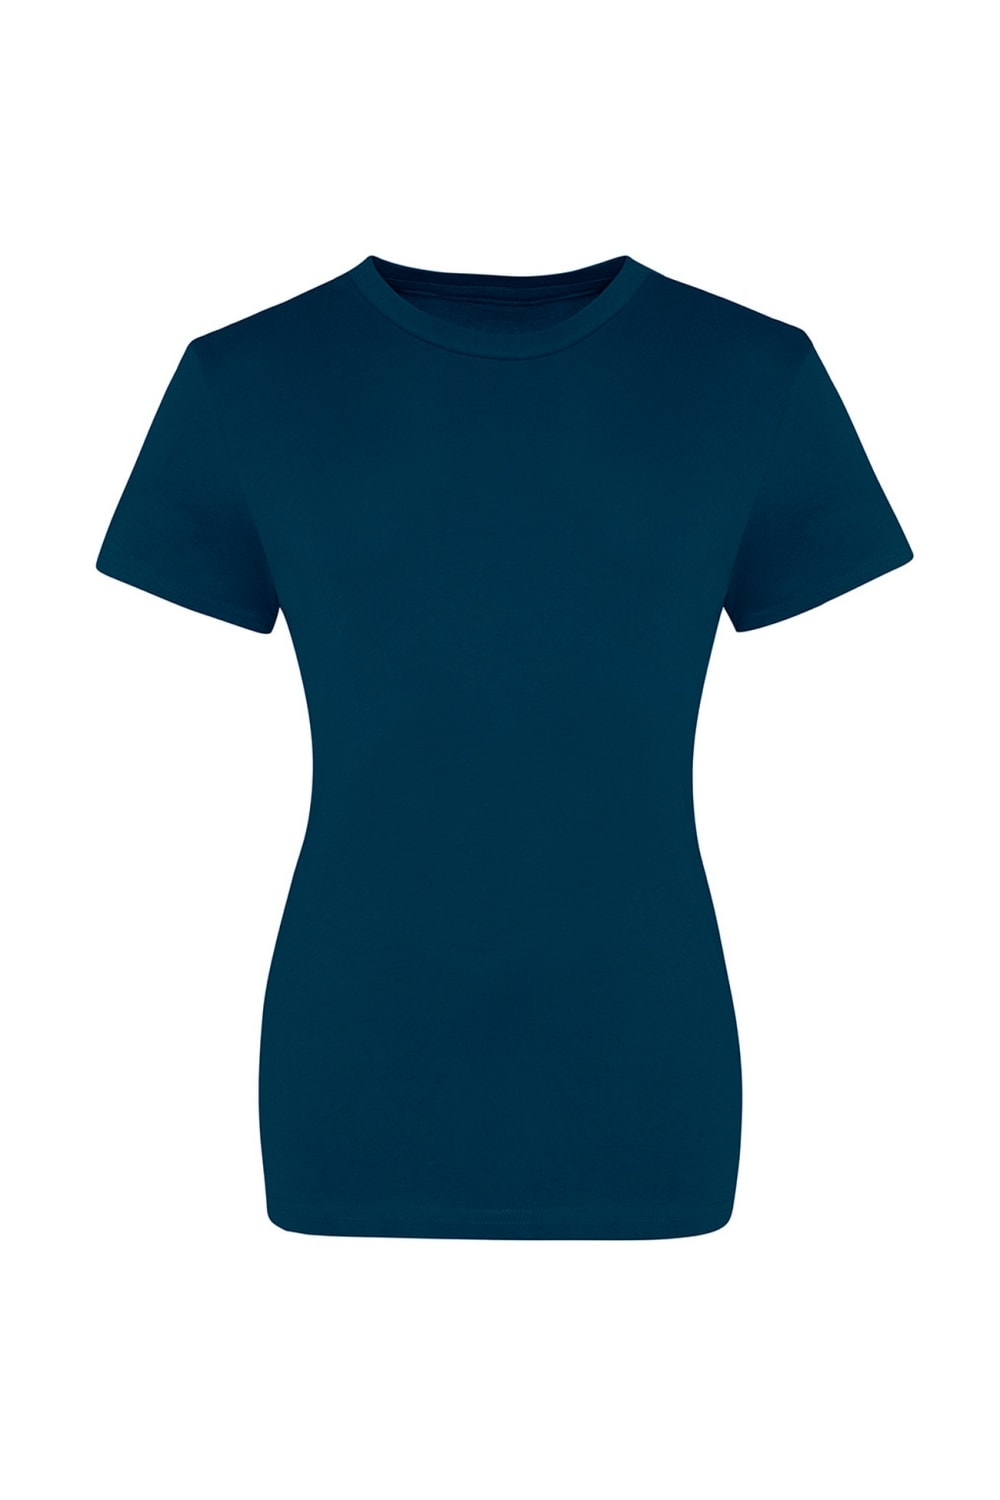 AWDis Just Ts Womens/Ladies The 100 Girlie T-Shirt (Ink Blue)